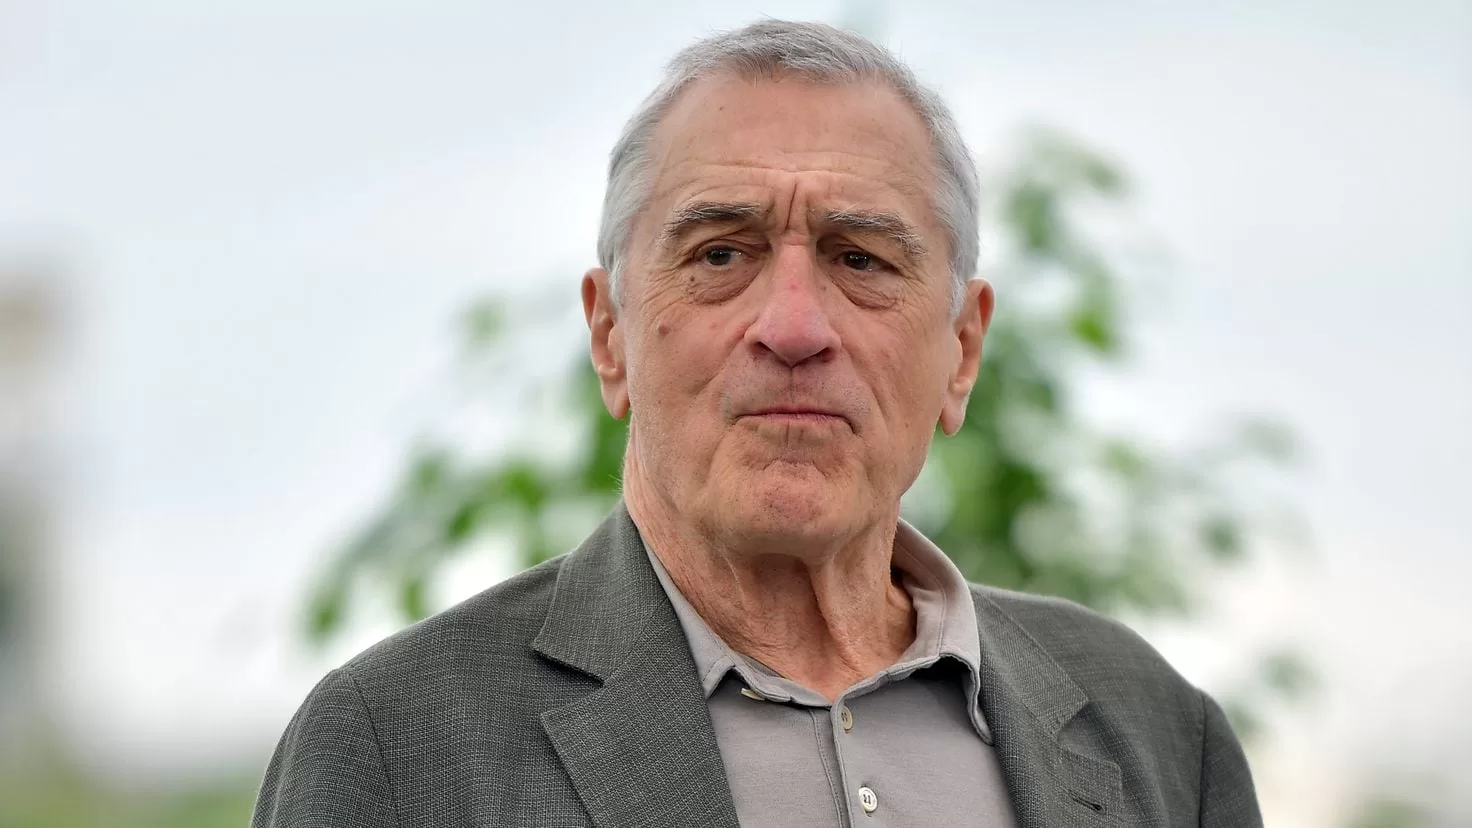 Robert De Niro loses in court: his production company will pay one million euros to his former assistant
